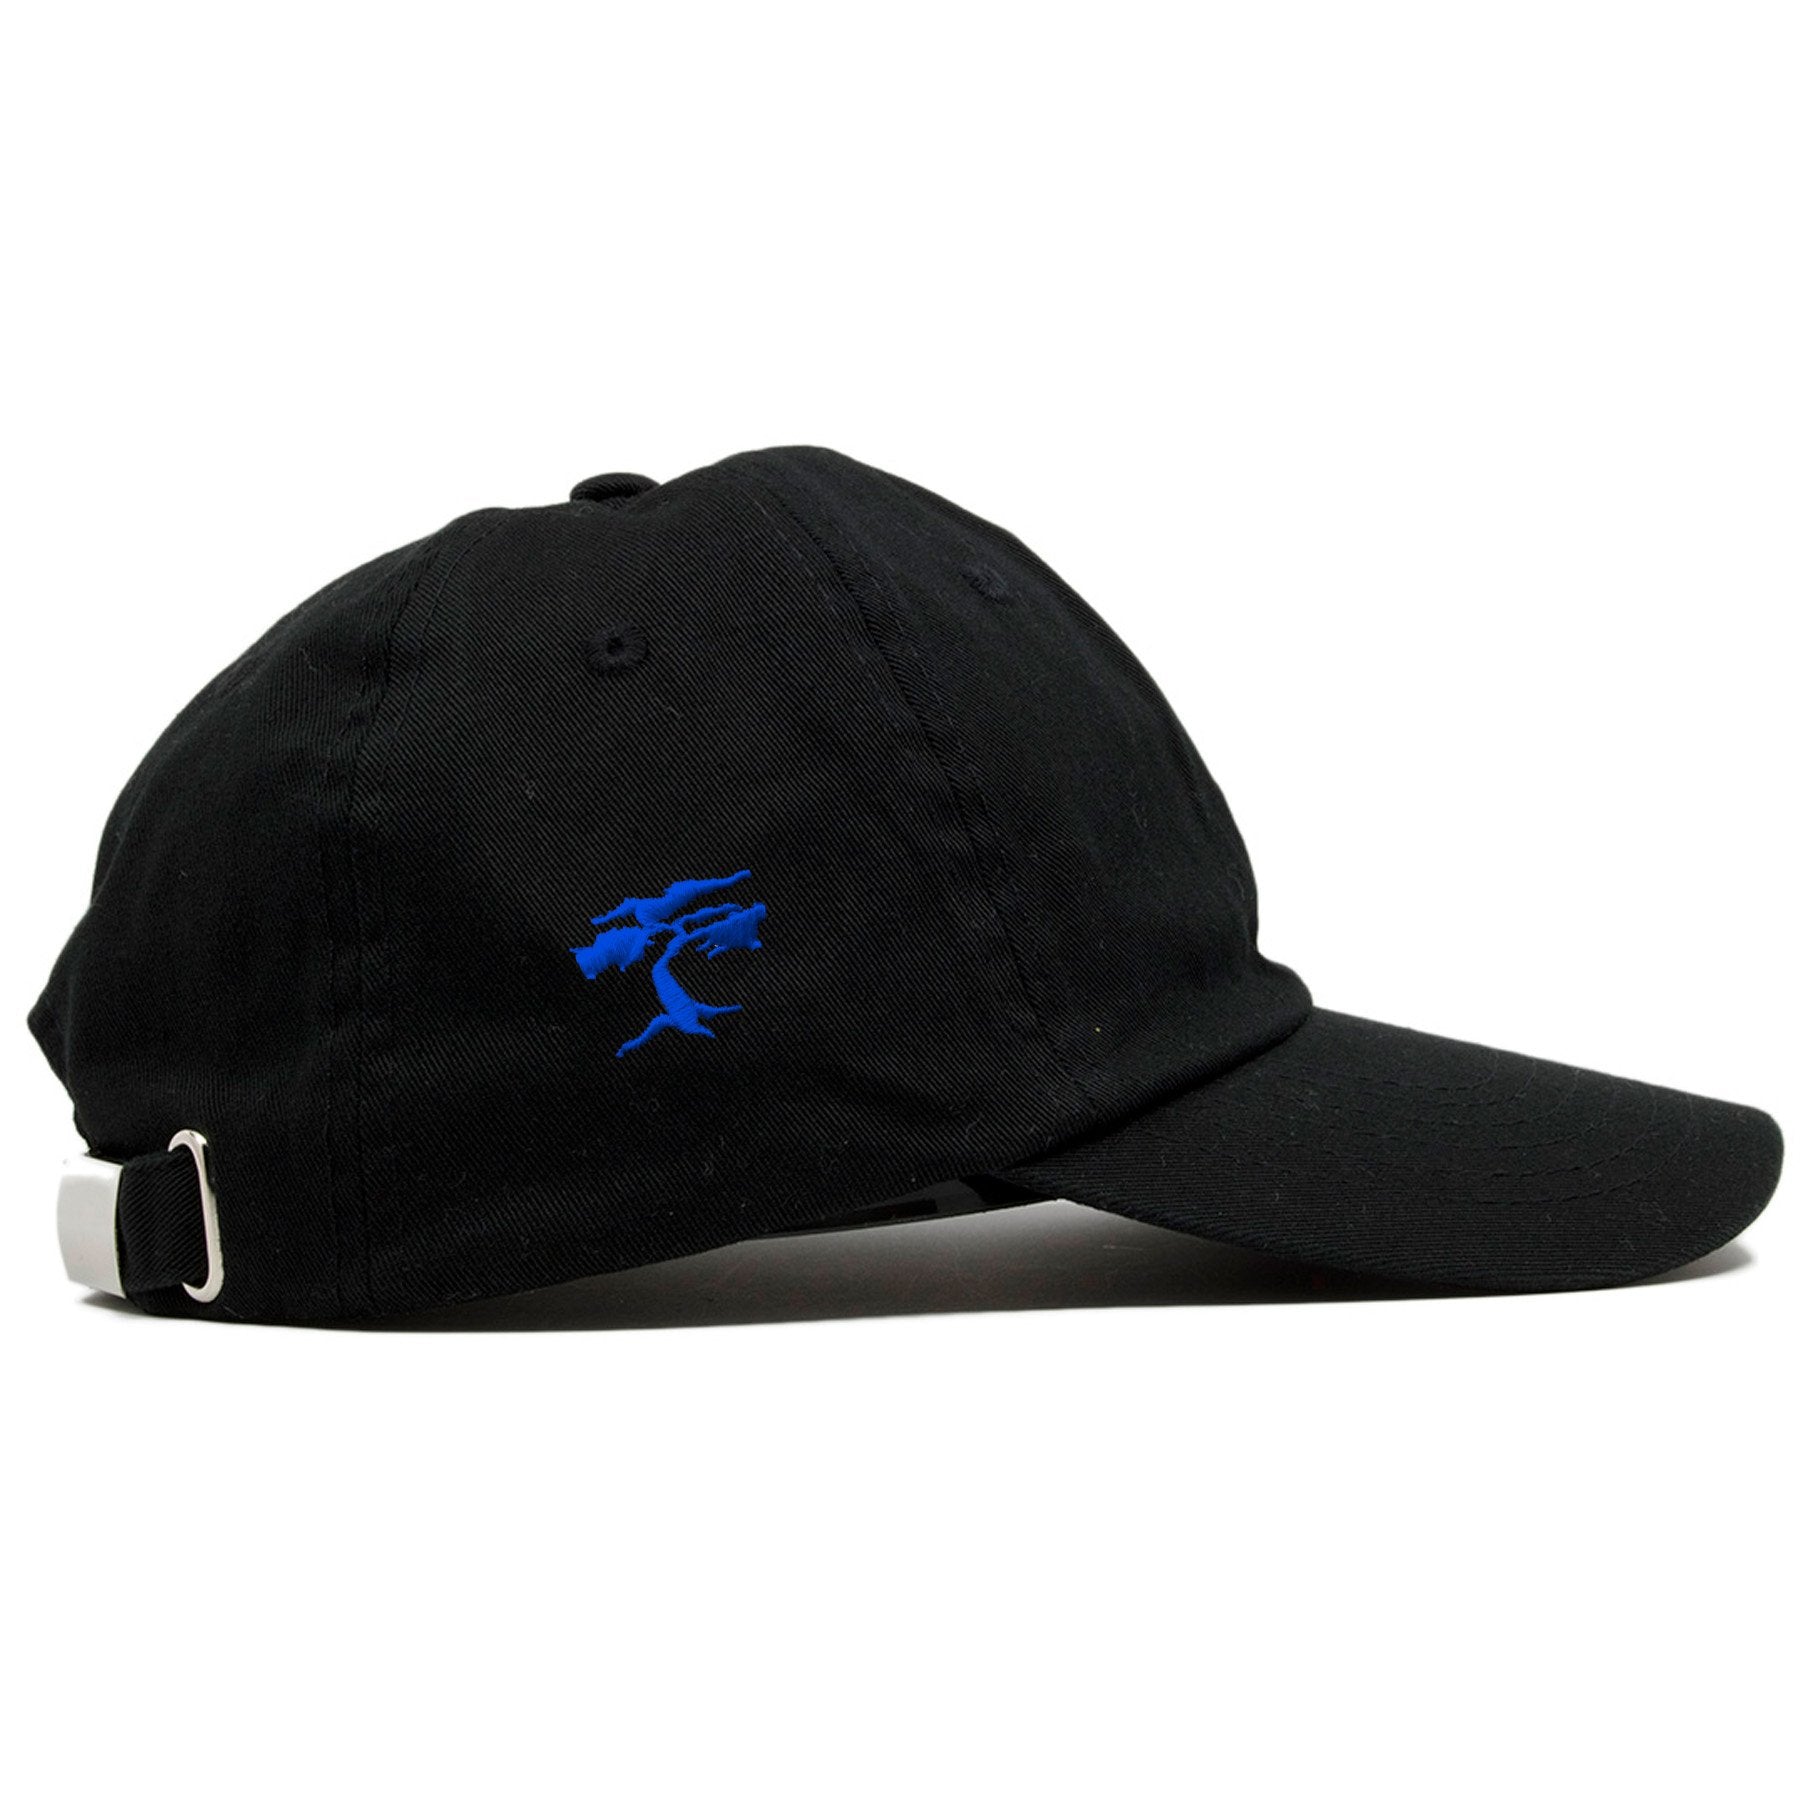 on the right side of the space jam squad dad hat there is a blue foot clan logo embroidered on the side